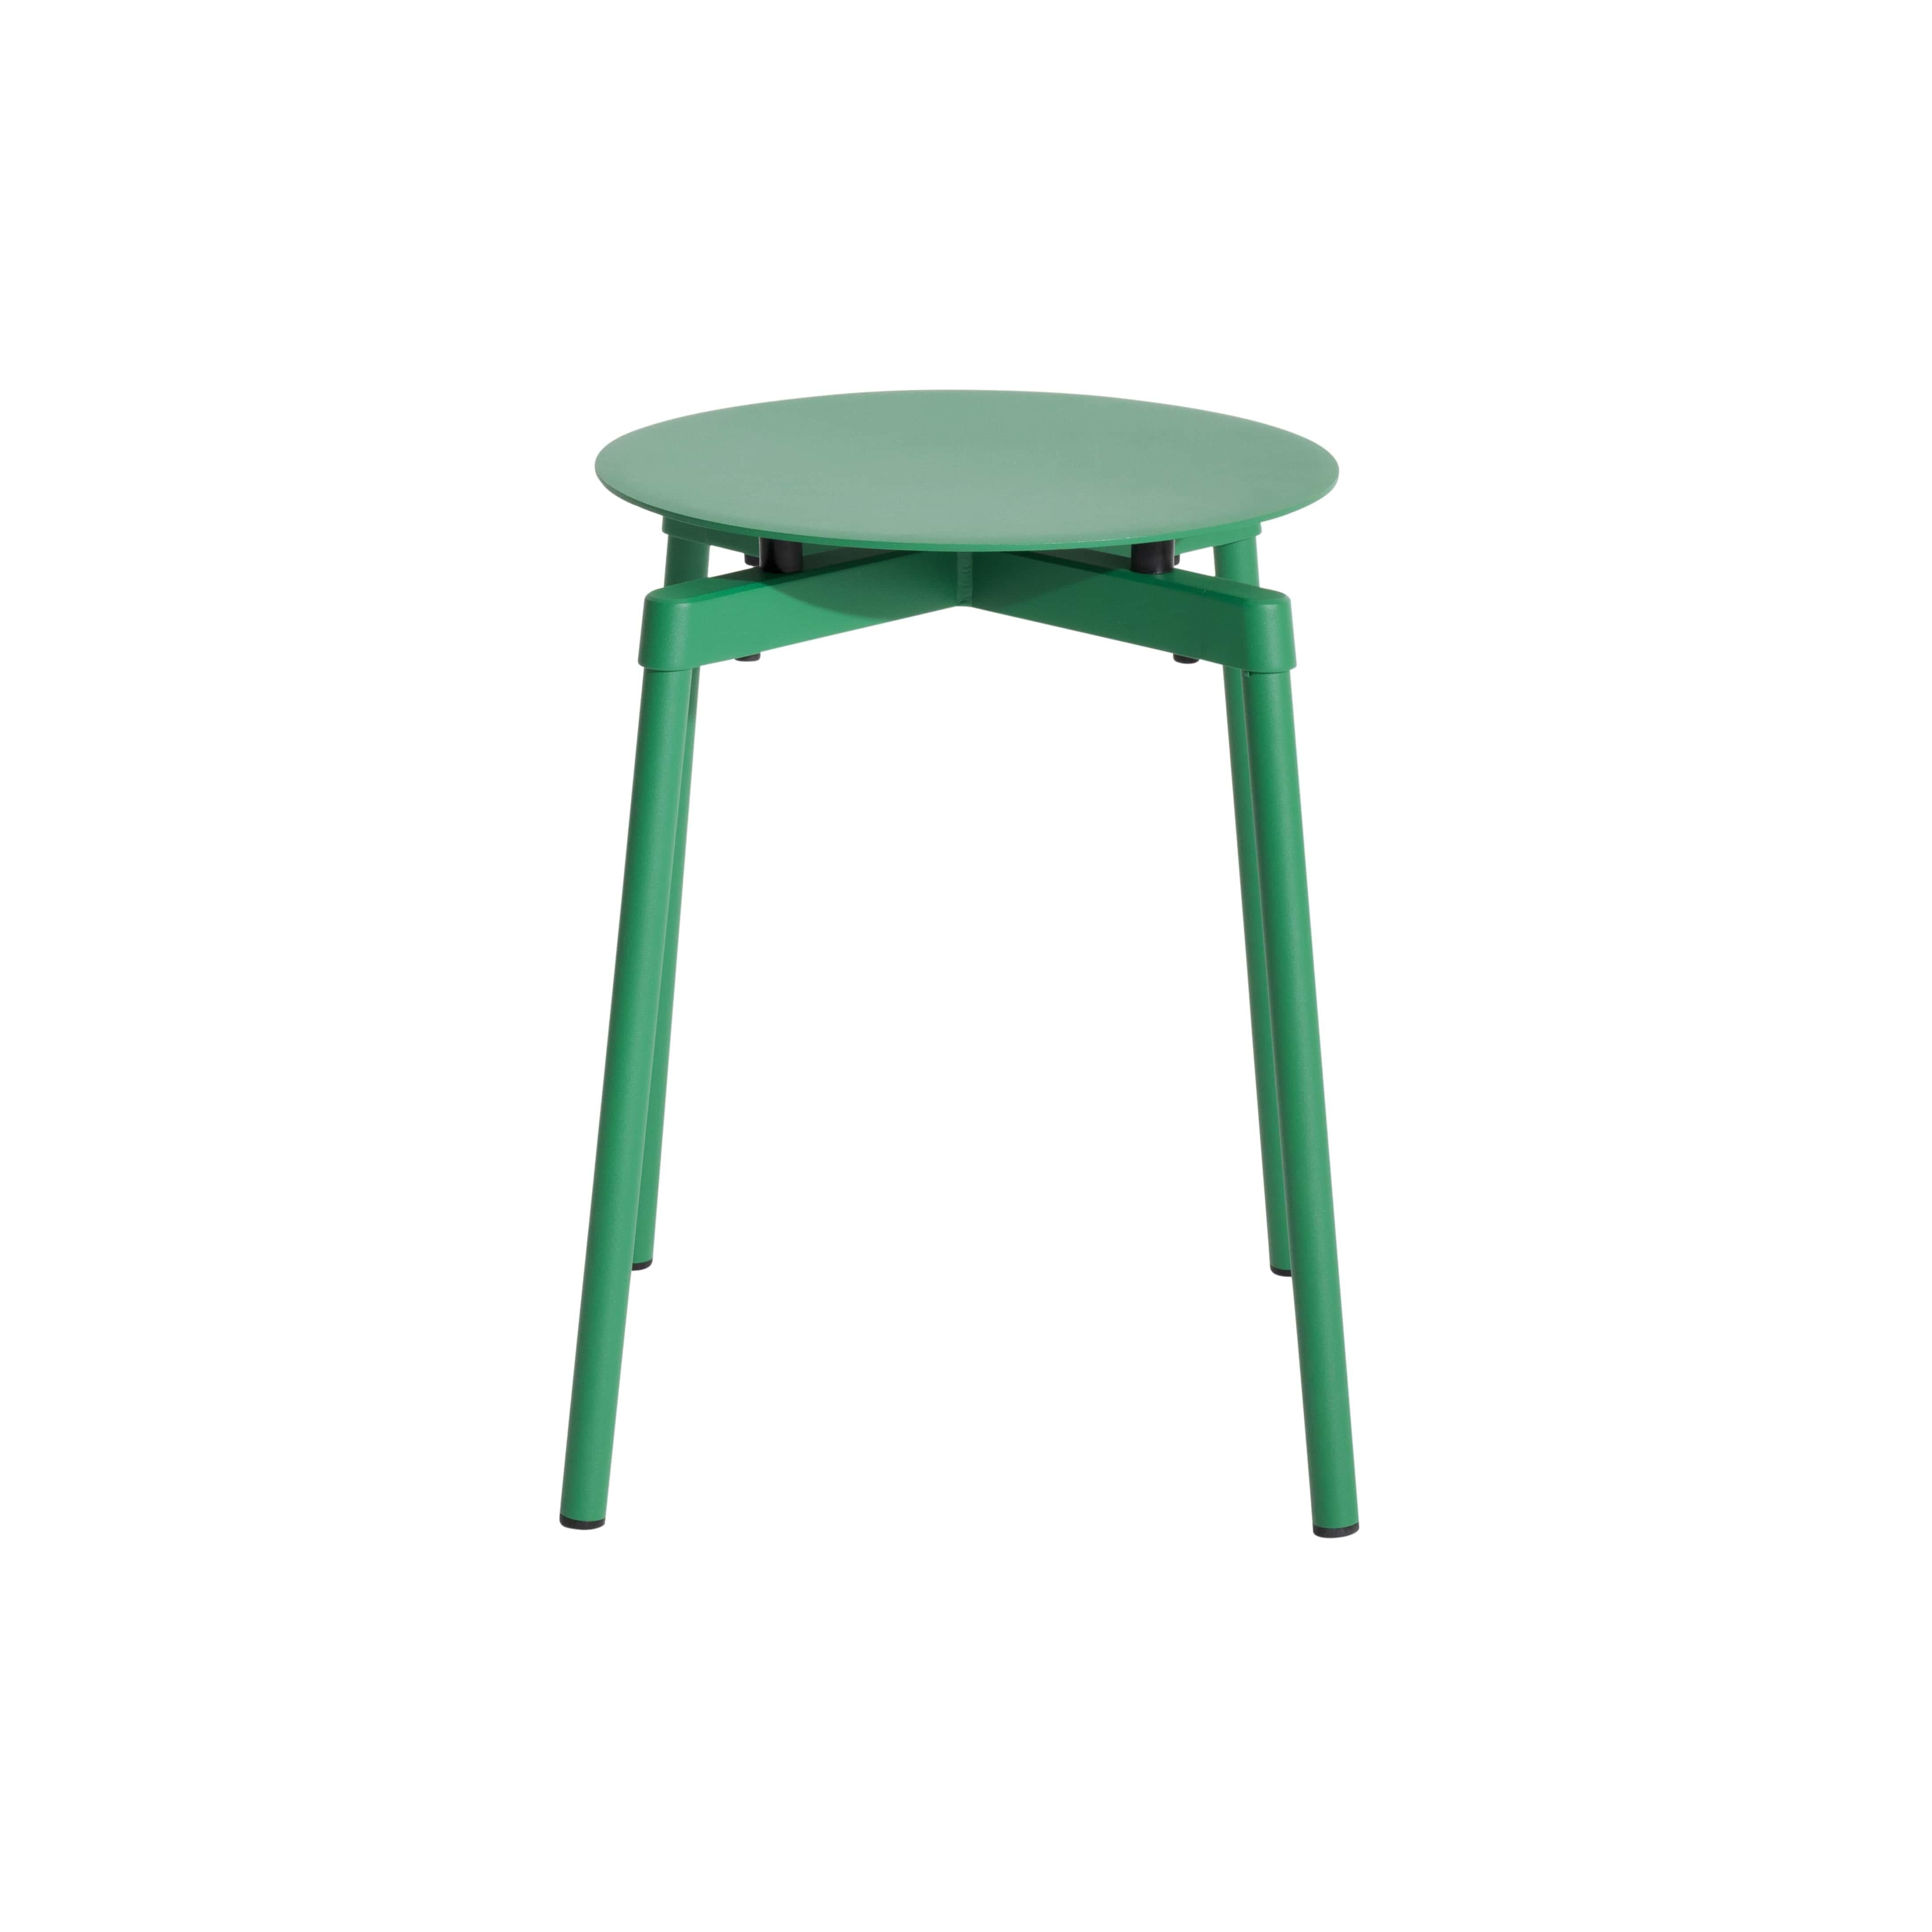 Petite Friture Fromme Stool in Mint-green Aluminium by Tom Chung, 2020

The Fromme collection stands out by its pure line and compact design. Absorbers placed under the seating gives a soft and very comfortable flexibility to seats. Made from